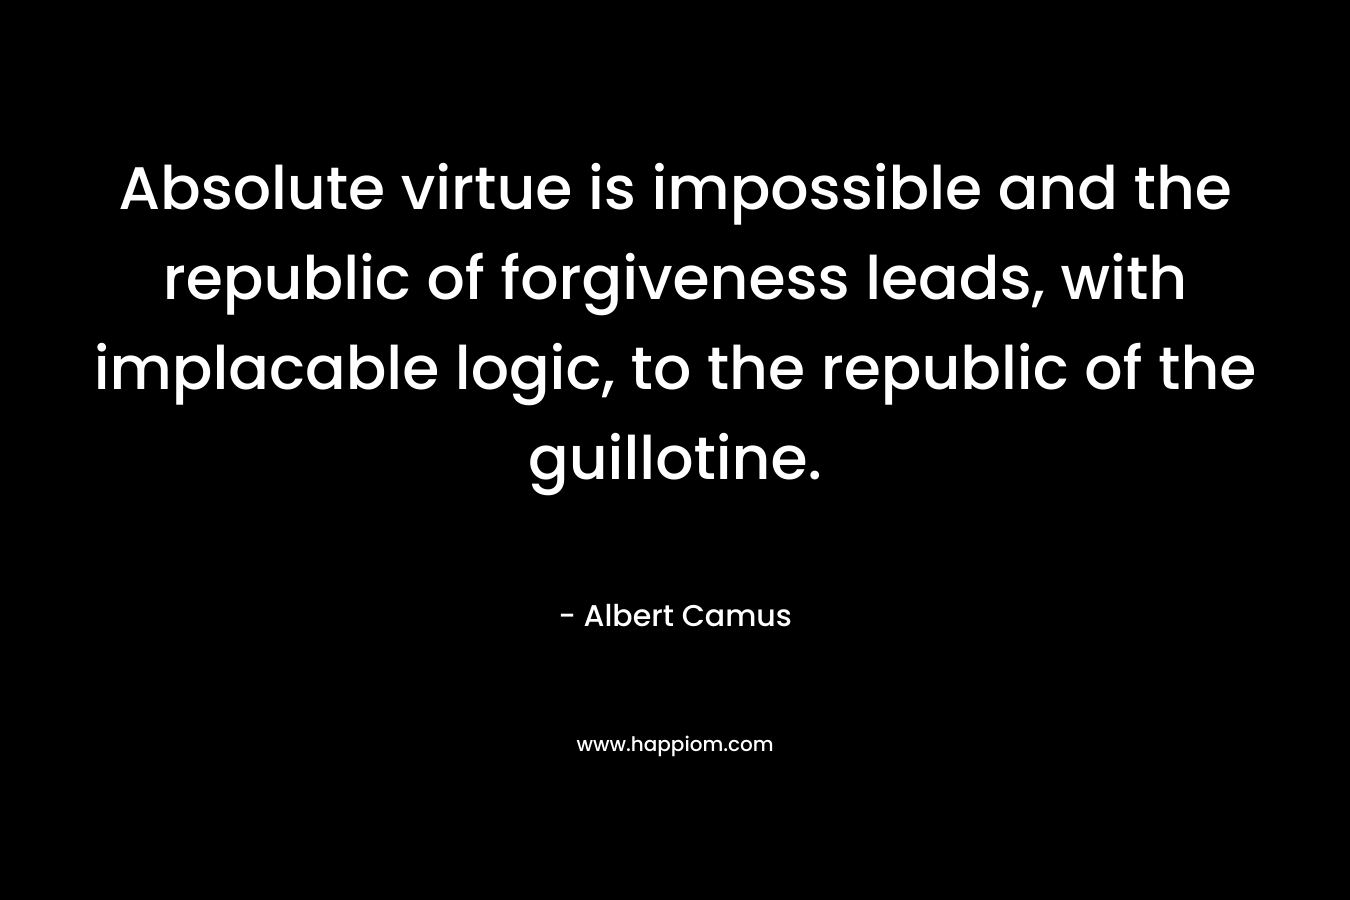 Absolute virtue is impossible and the republic of forgiveness leads, with implacable logic, to the republic of the guillotine.